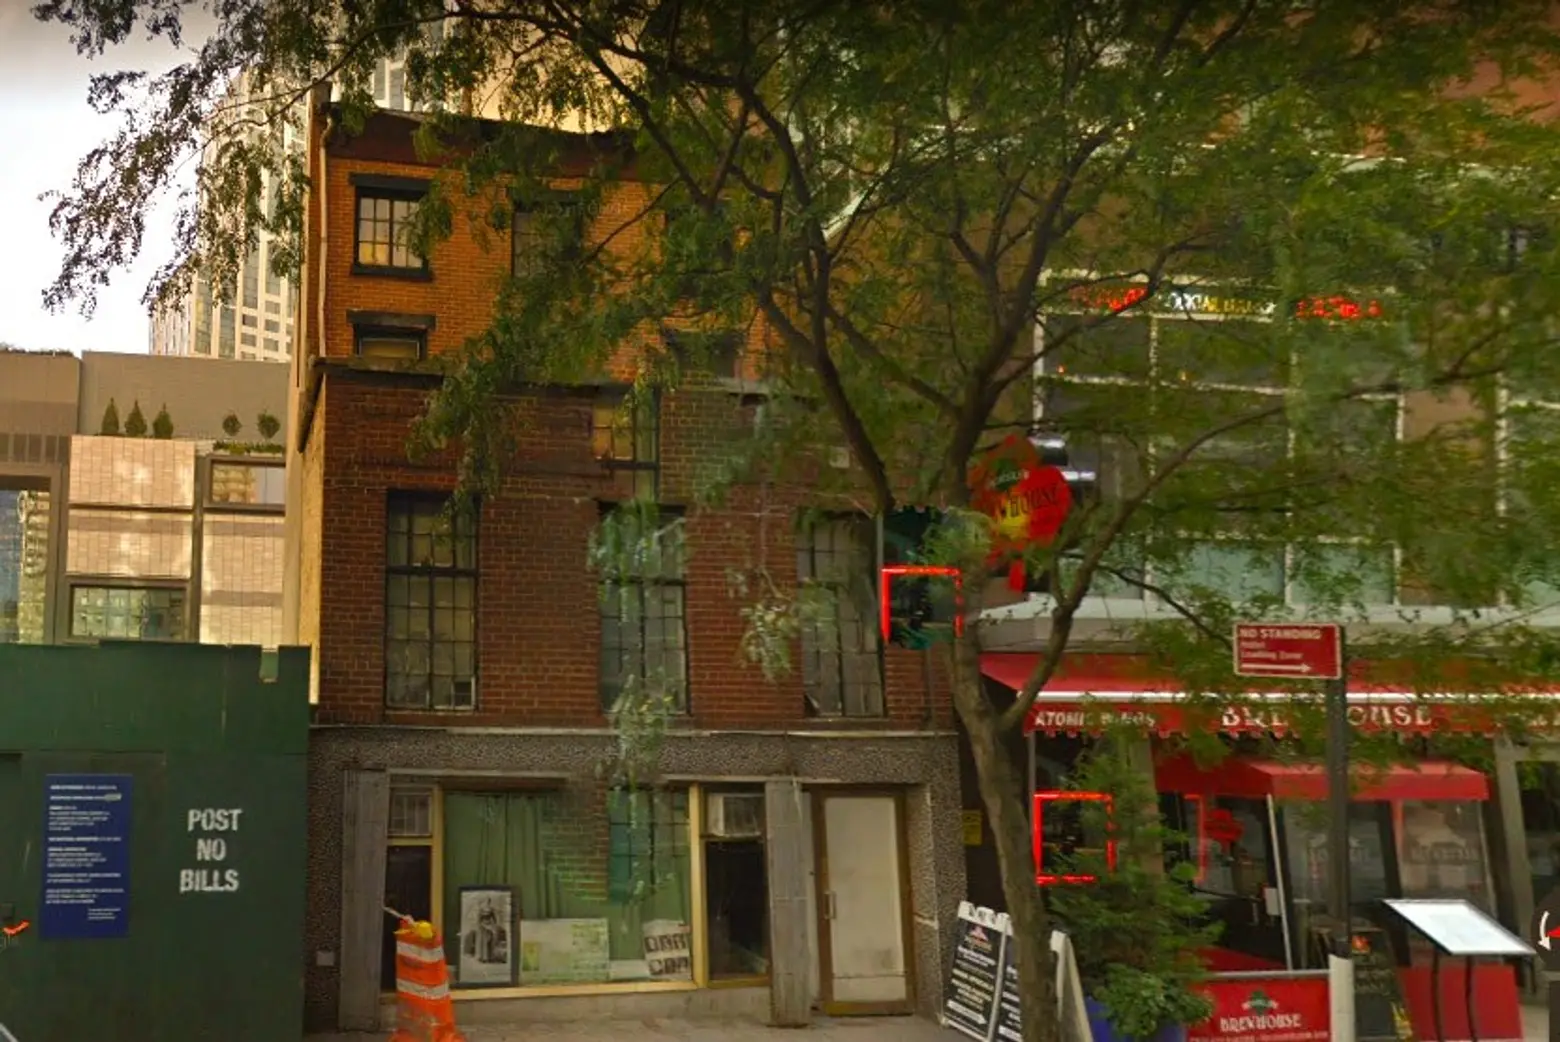 Historic Downtown Brooklyn townhouse with strong abolitionist ties in danger of demolition